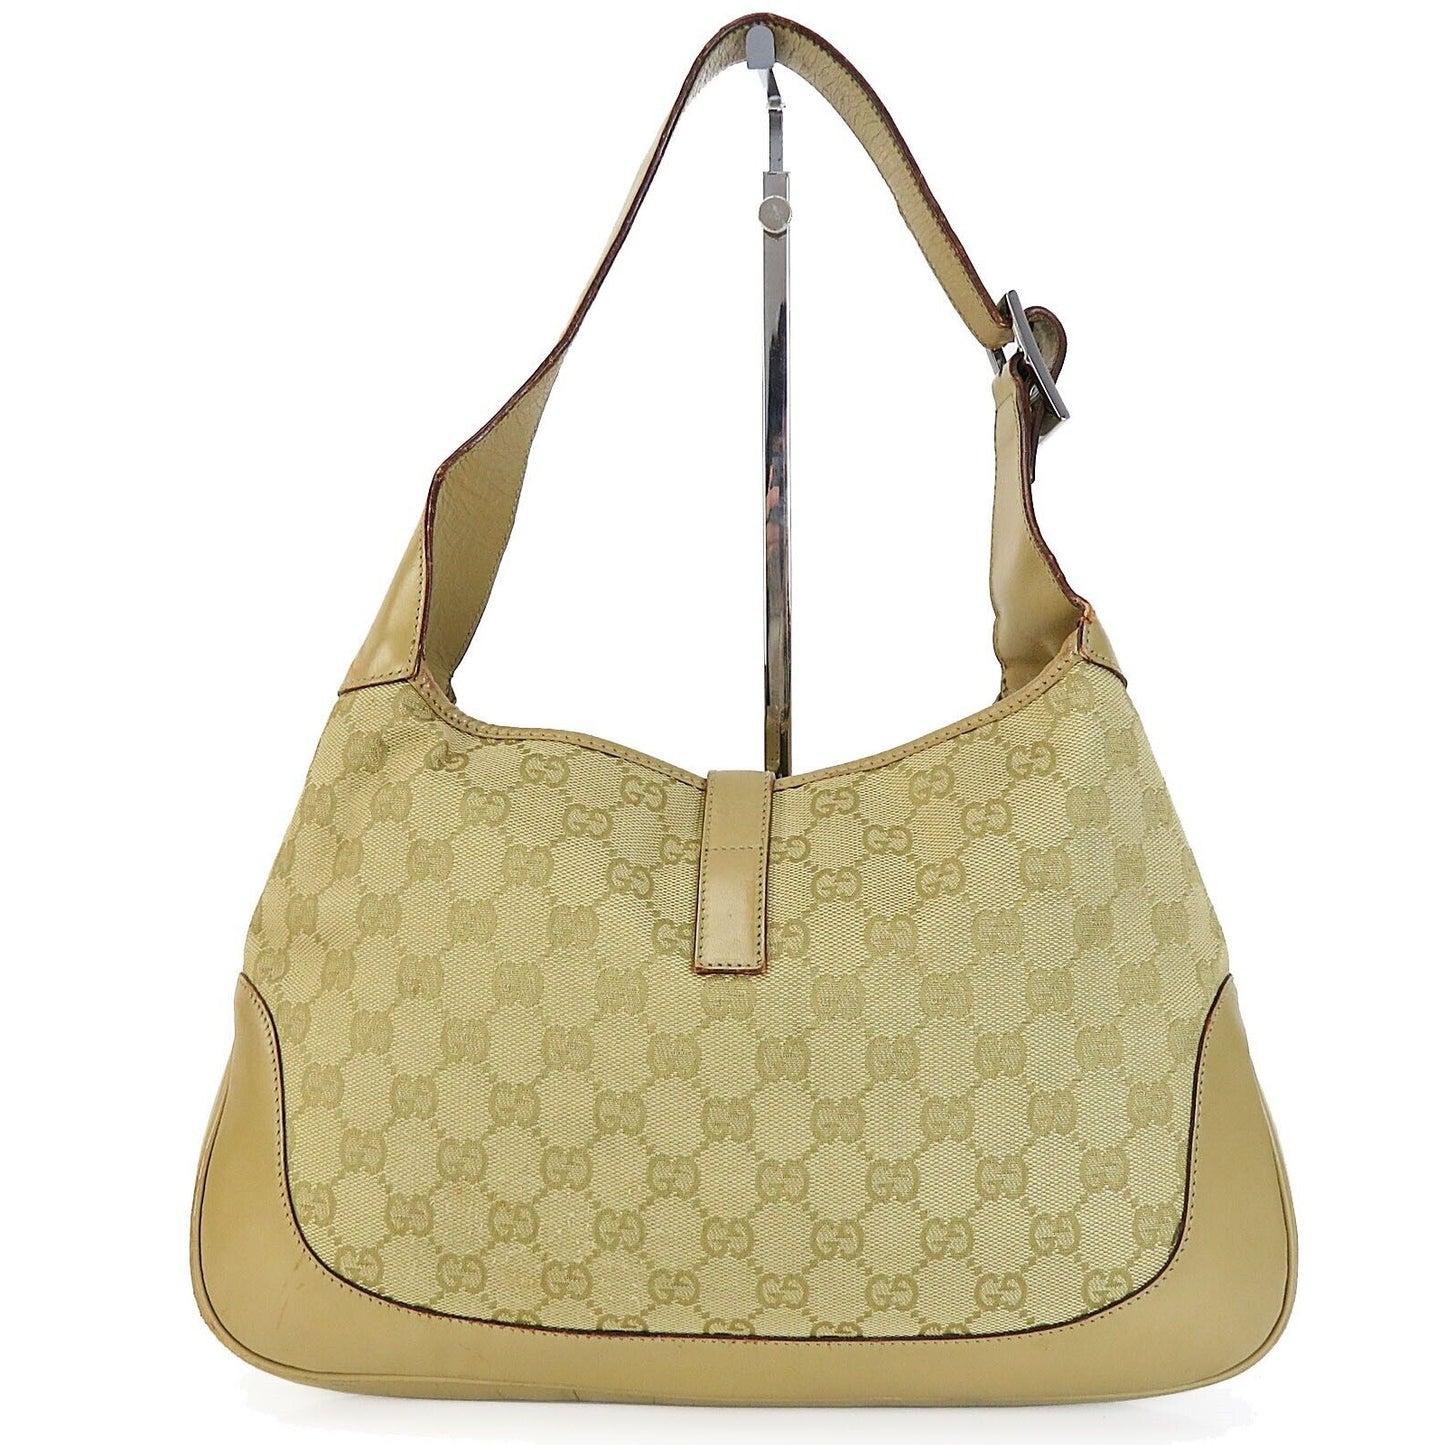 Gucci, light yellow fabric with a camel Guccissima print and metallic leather, Tom Ford era Jackie- O shoulder bag with a